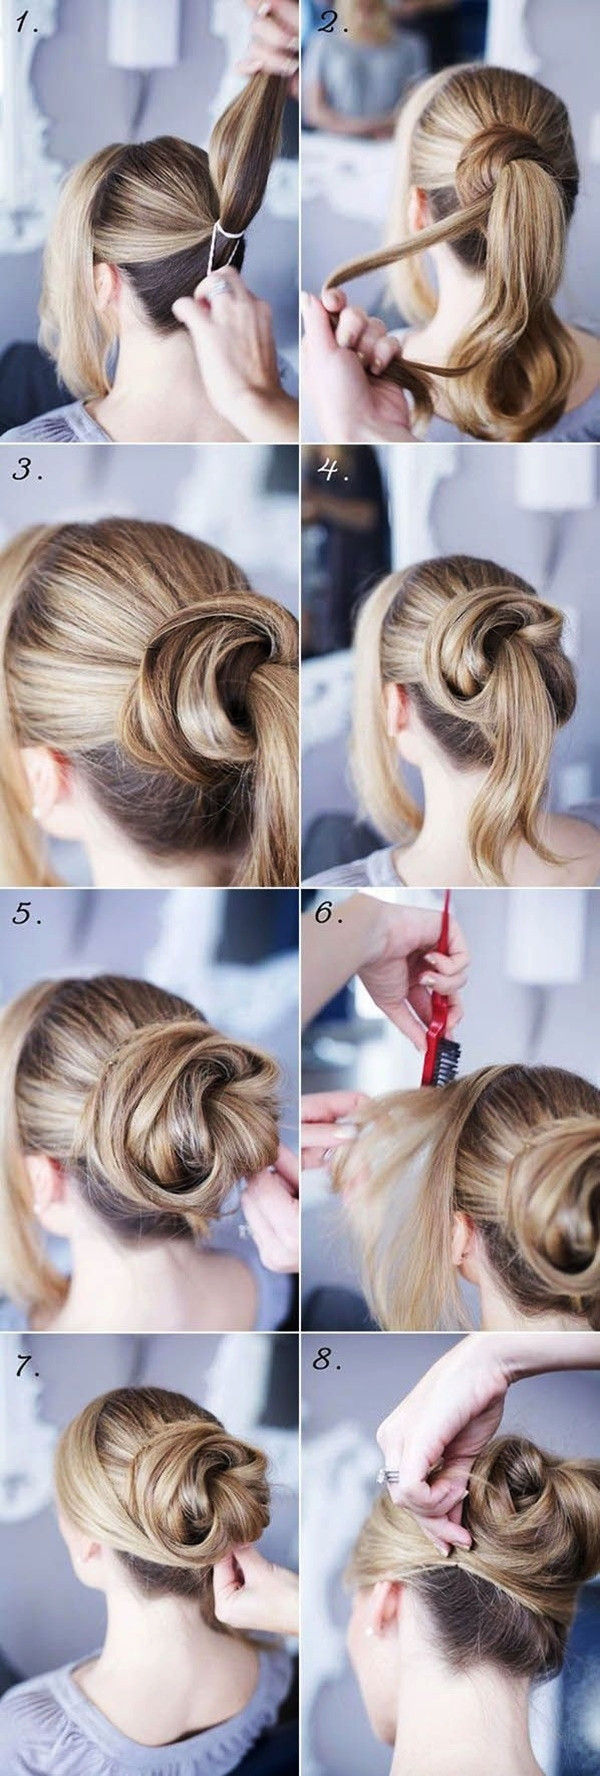 Hairstyle Easy Step By Step
 15 Easy Step By Step Hairstyles for Long Hair